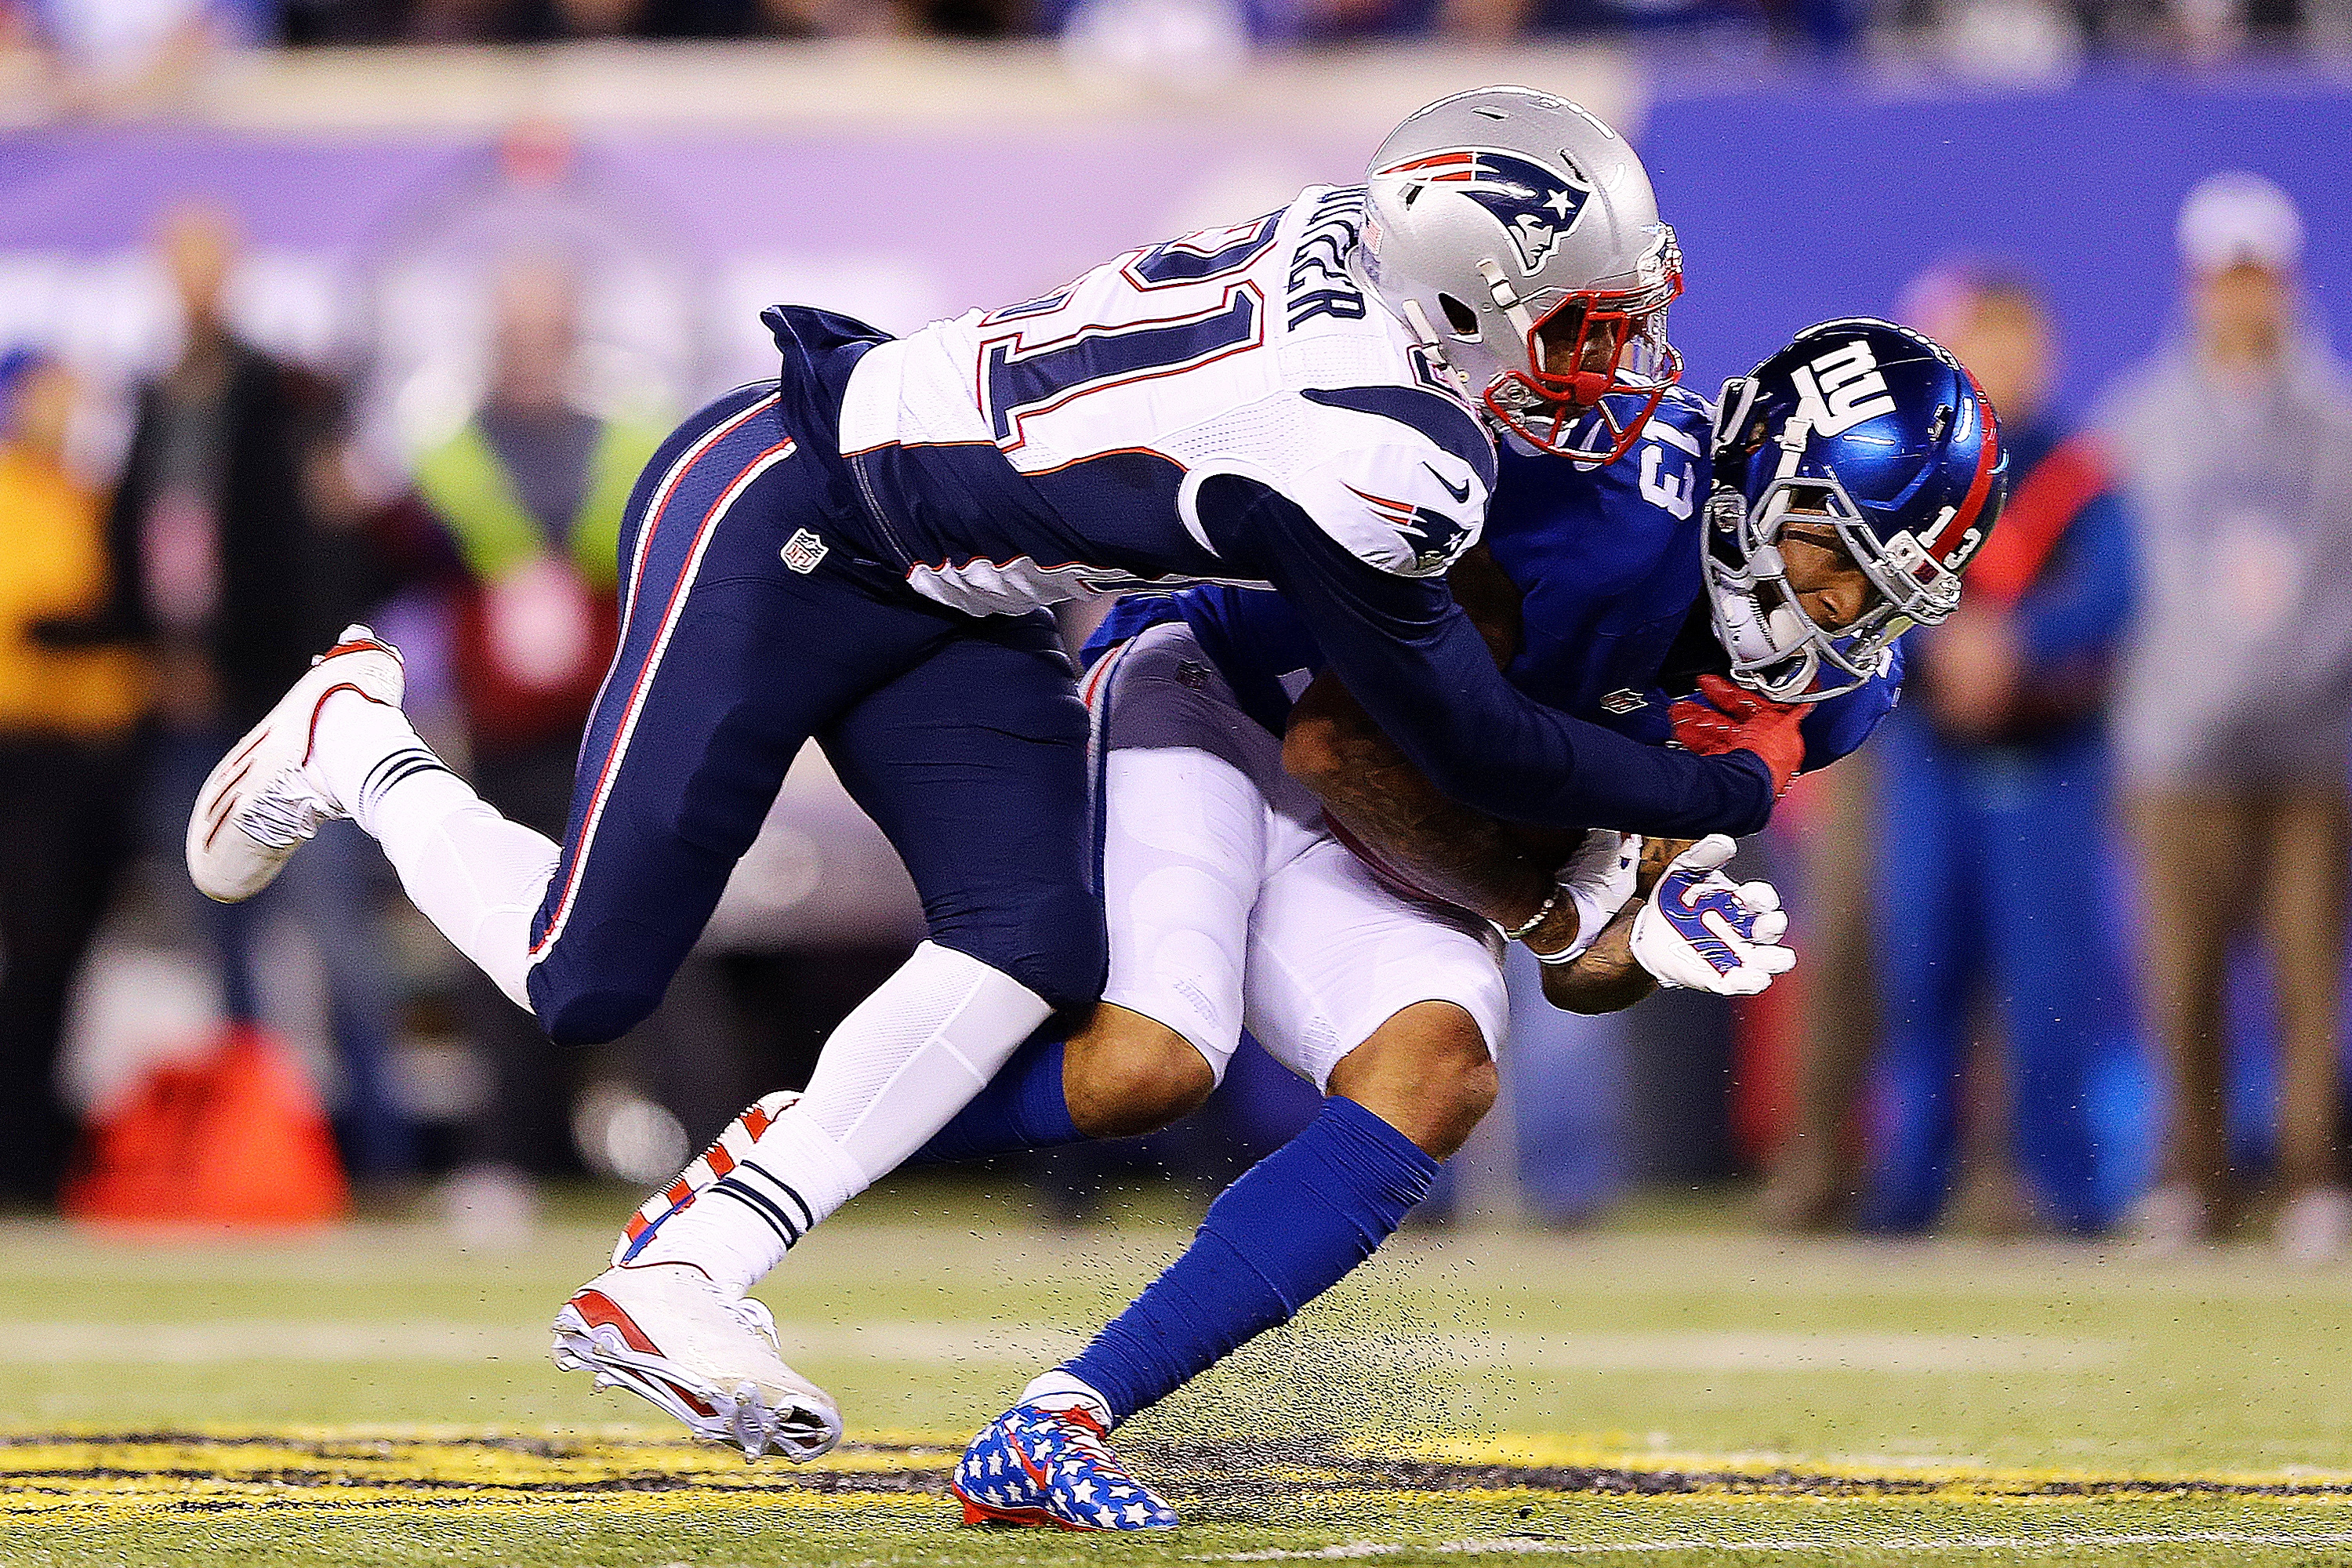 Odell Beckham #13 of the New York Giants is tackled by Malcolm Butler #21 of the New England Patriots during the third quarter at MetLife Stadium on November 15, 2015 in East Rutherford, New Jersey. (Elsa&mdash;Getty Images)